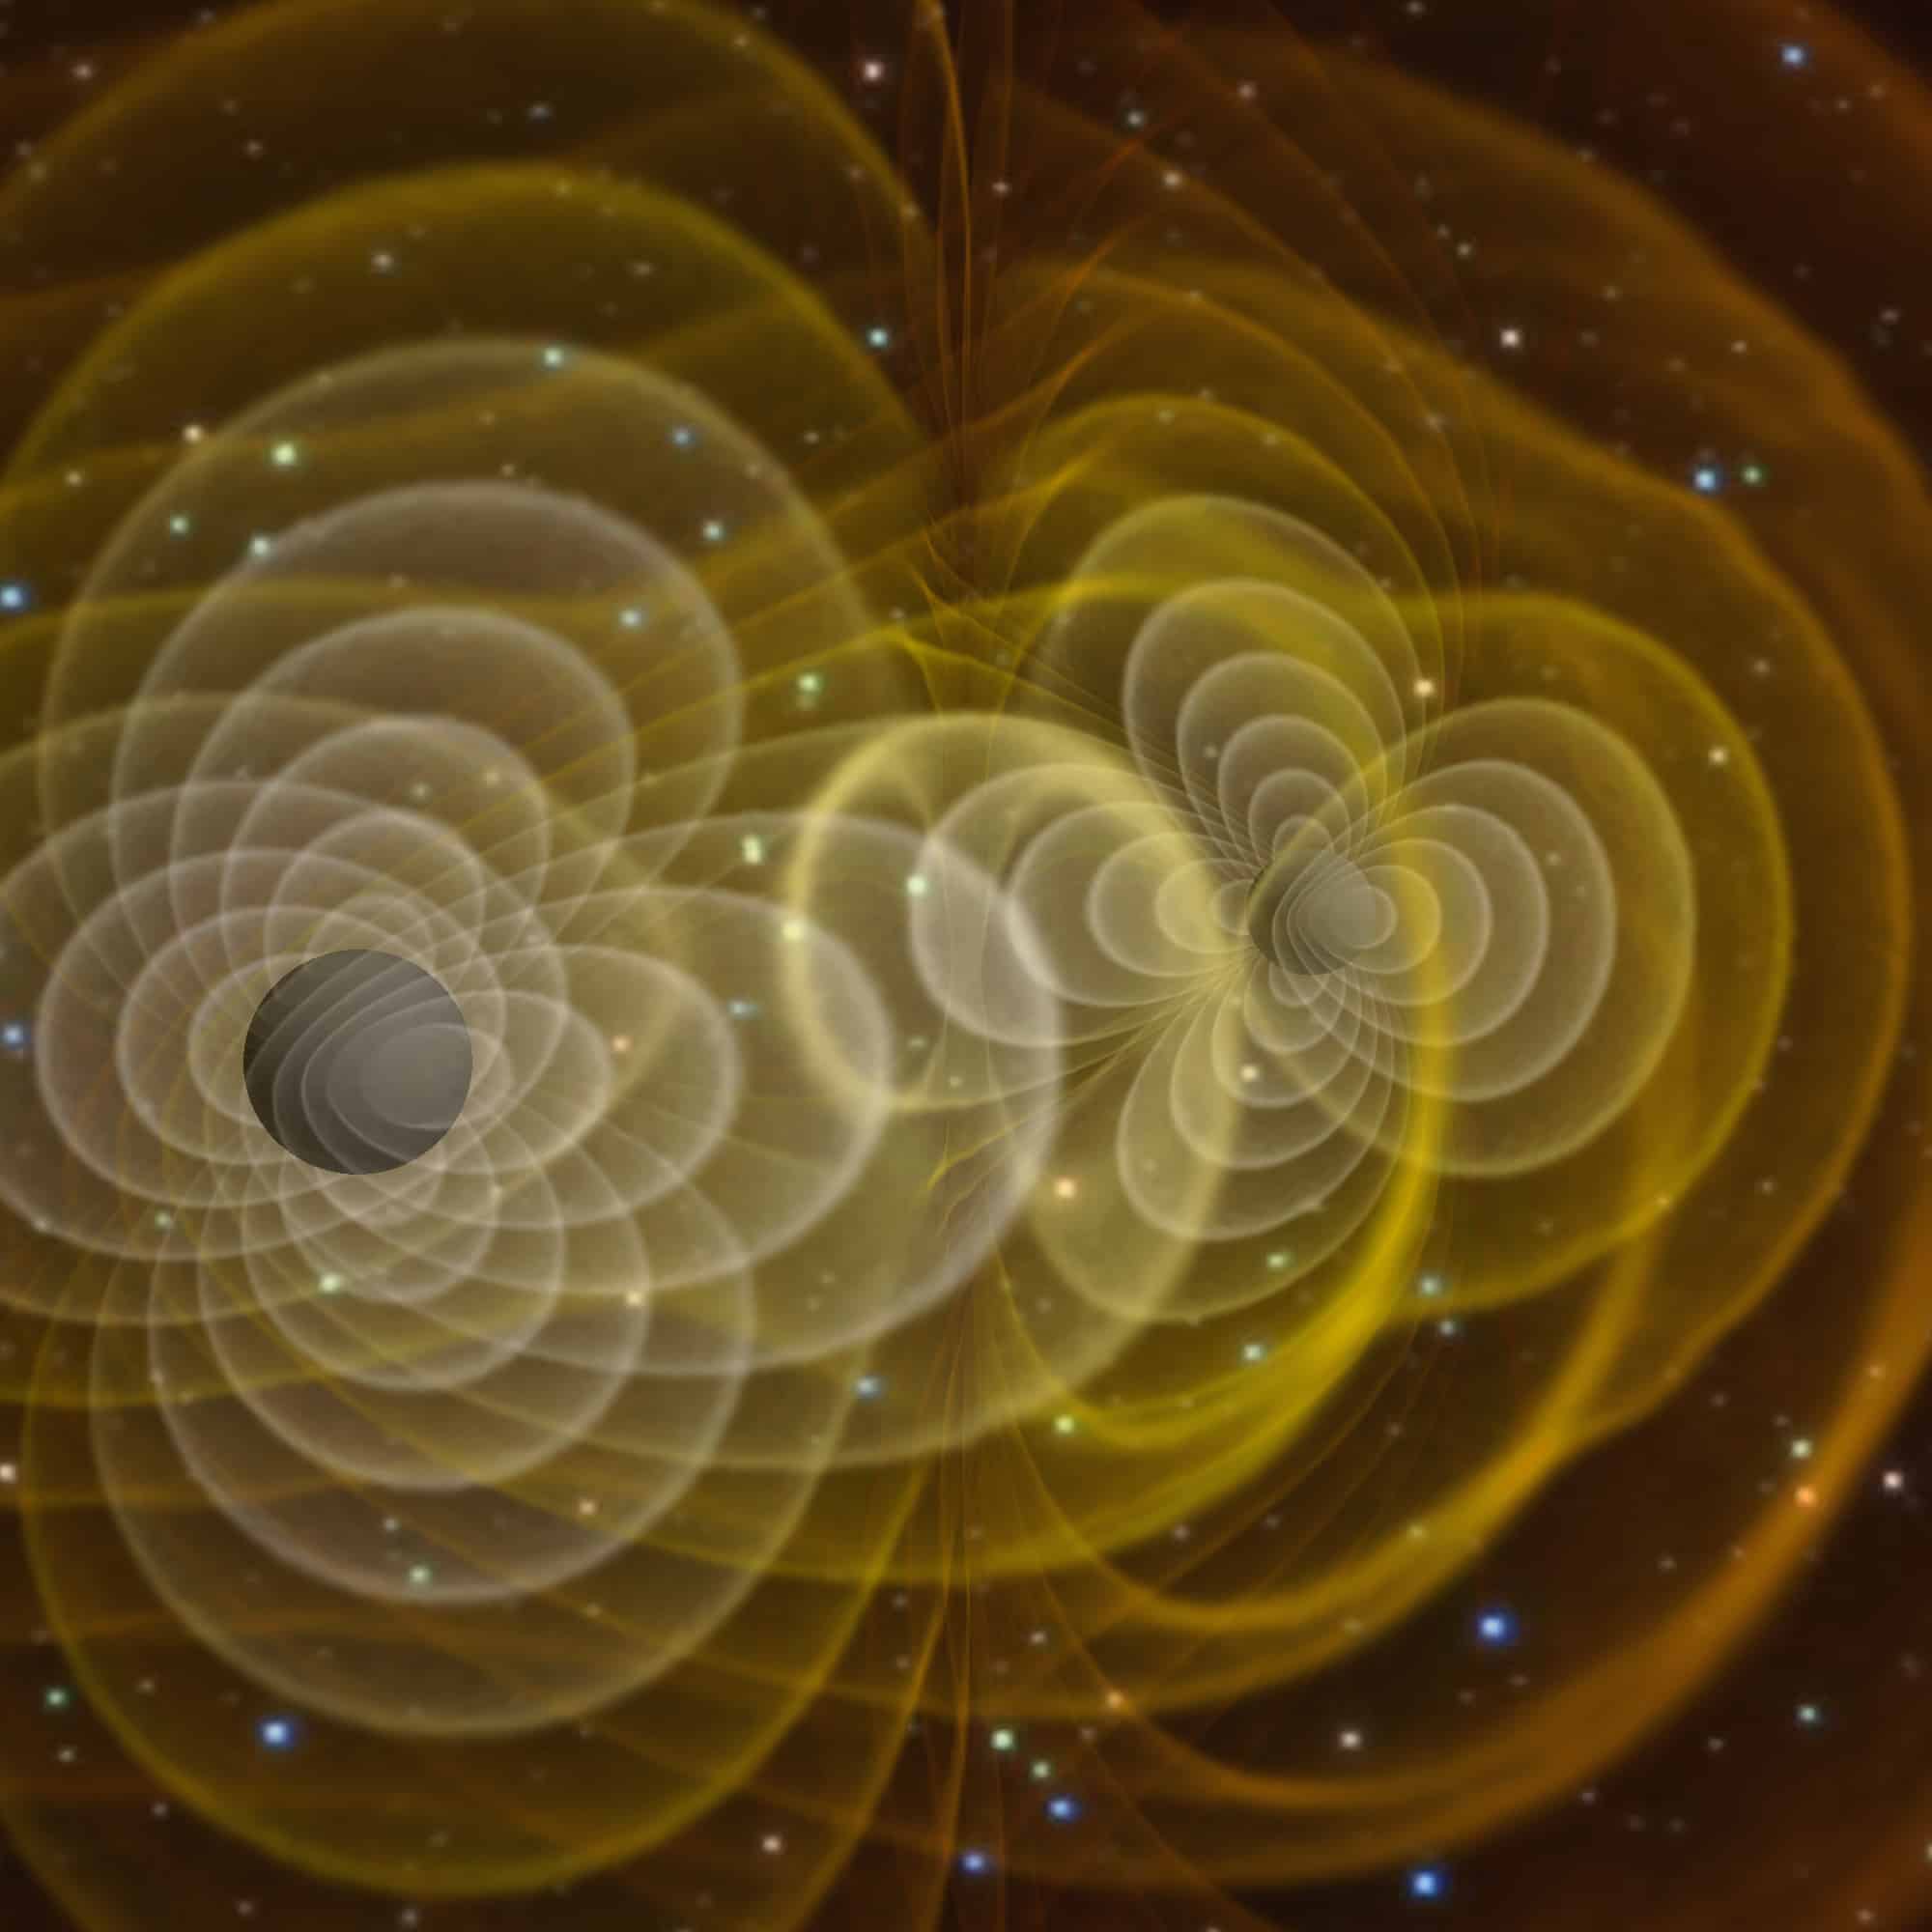 LIGO's vidsualisation of the gravity waves emitted by the orbiting black holes (known as 'inspiraling')